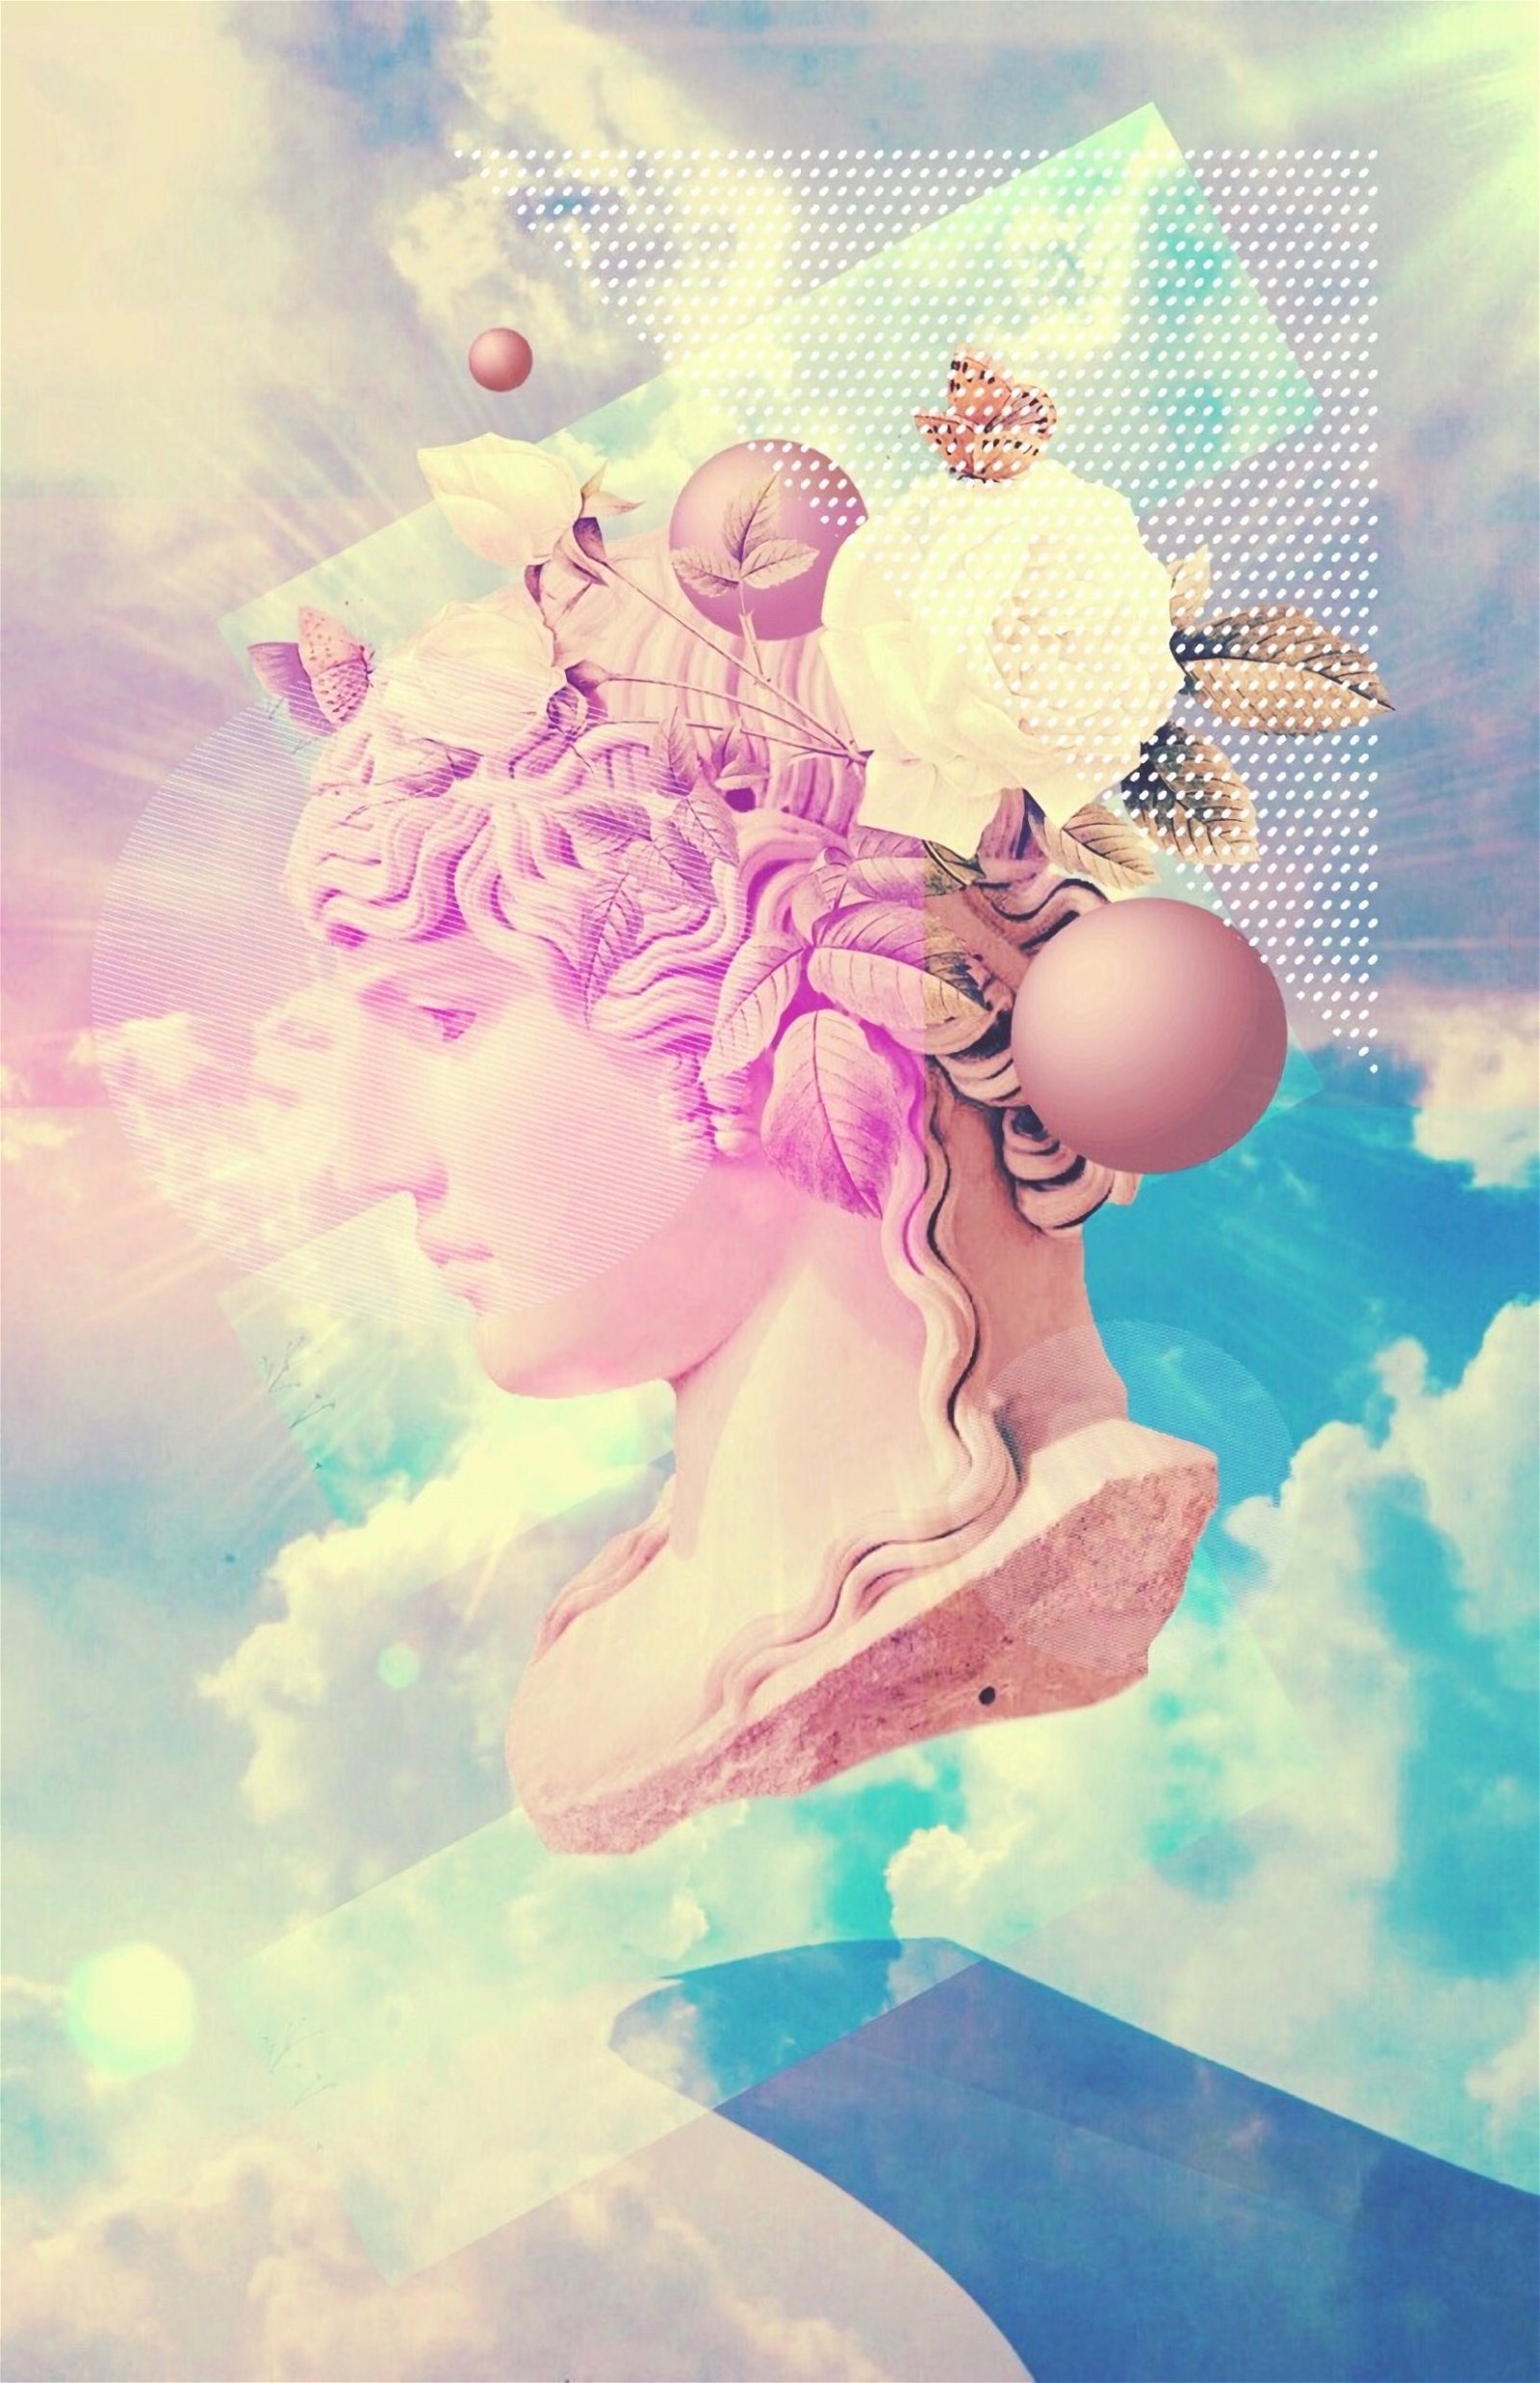 A picture of an artistic image with clouds - Vaporwave